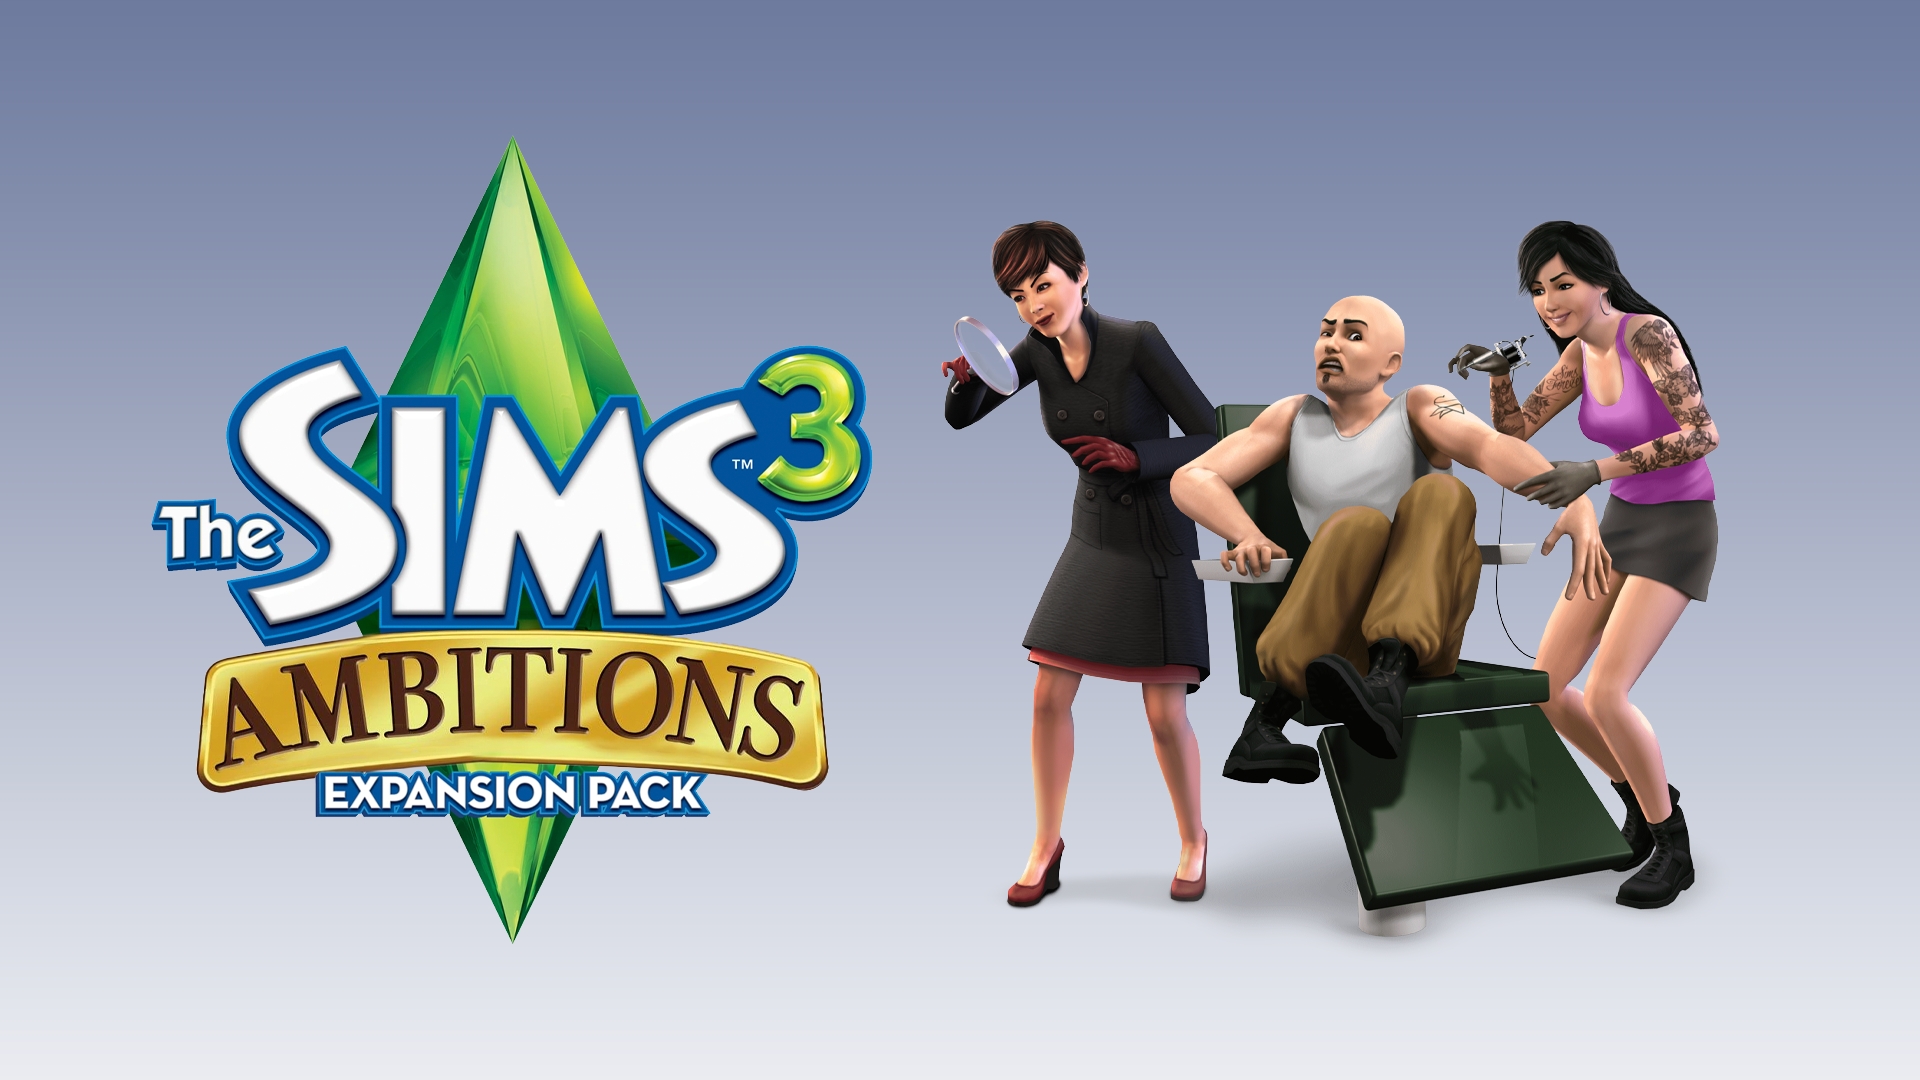 Install The Sims 3 University Life Expansion Pack Free on PC